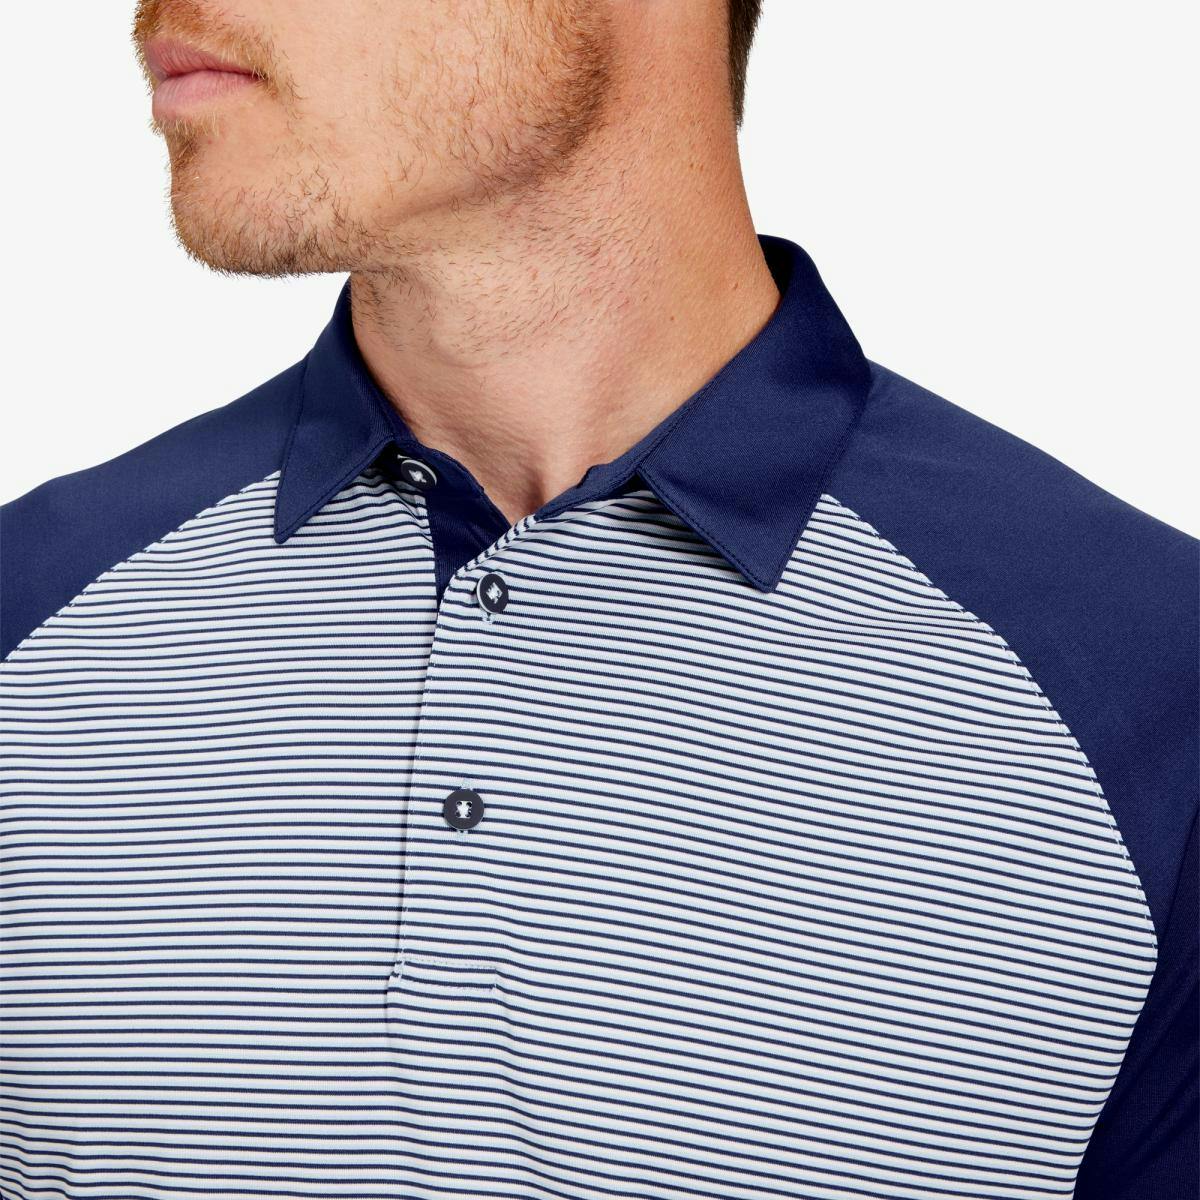 Versa Clubhouse Polo - Product Image 4